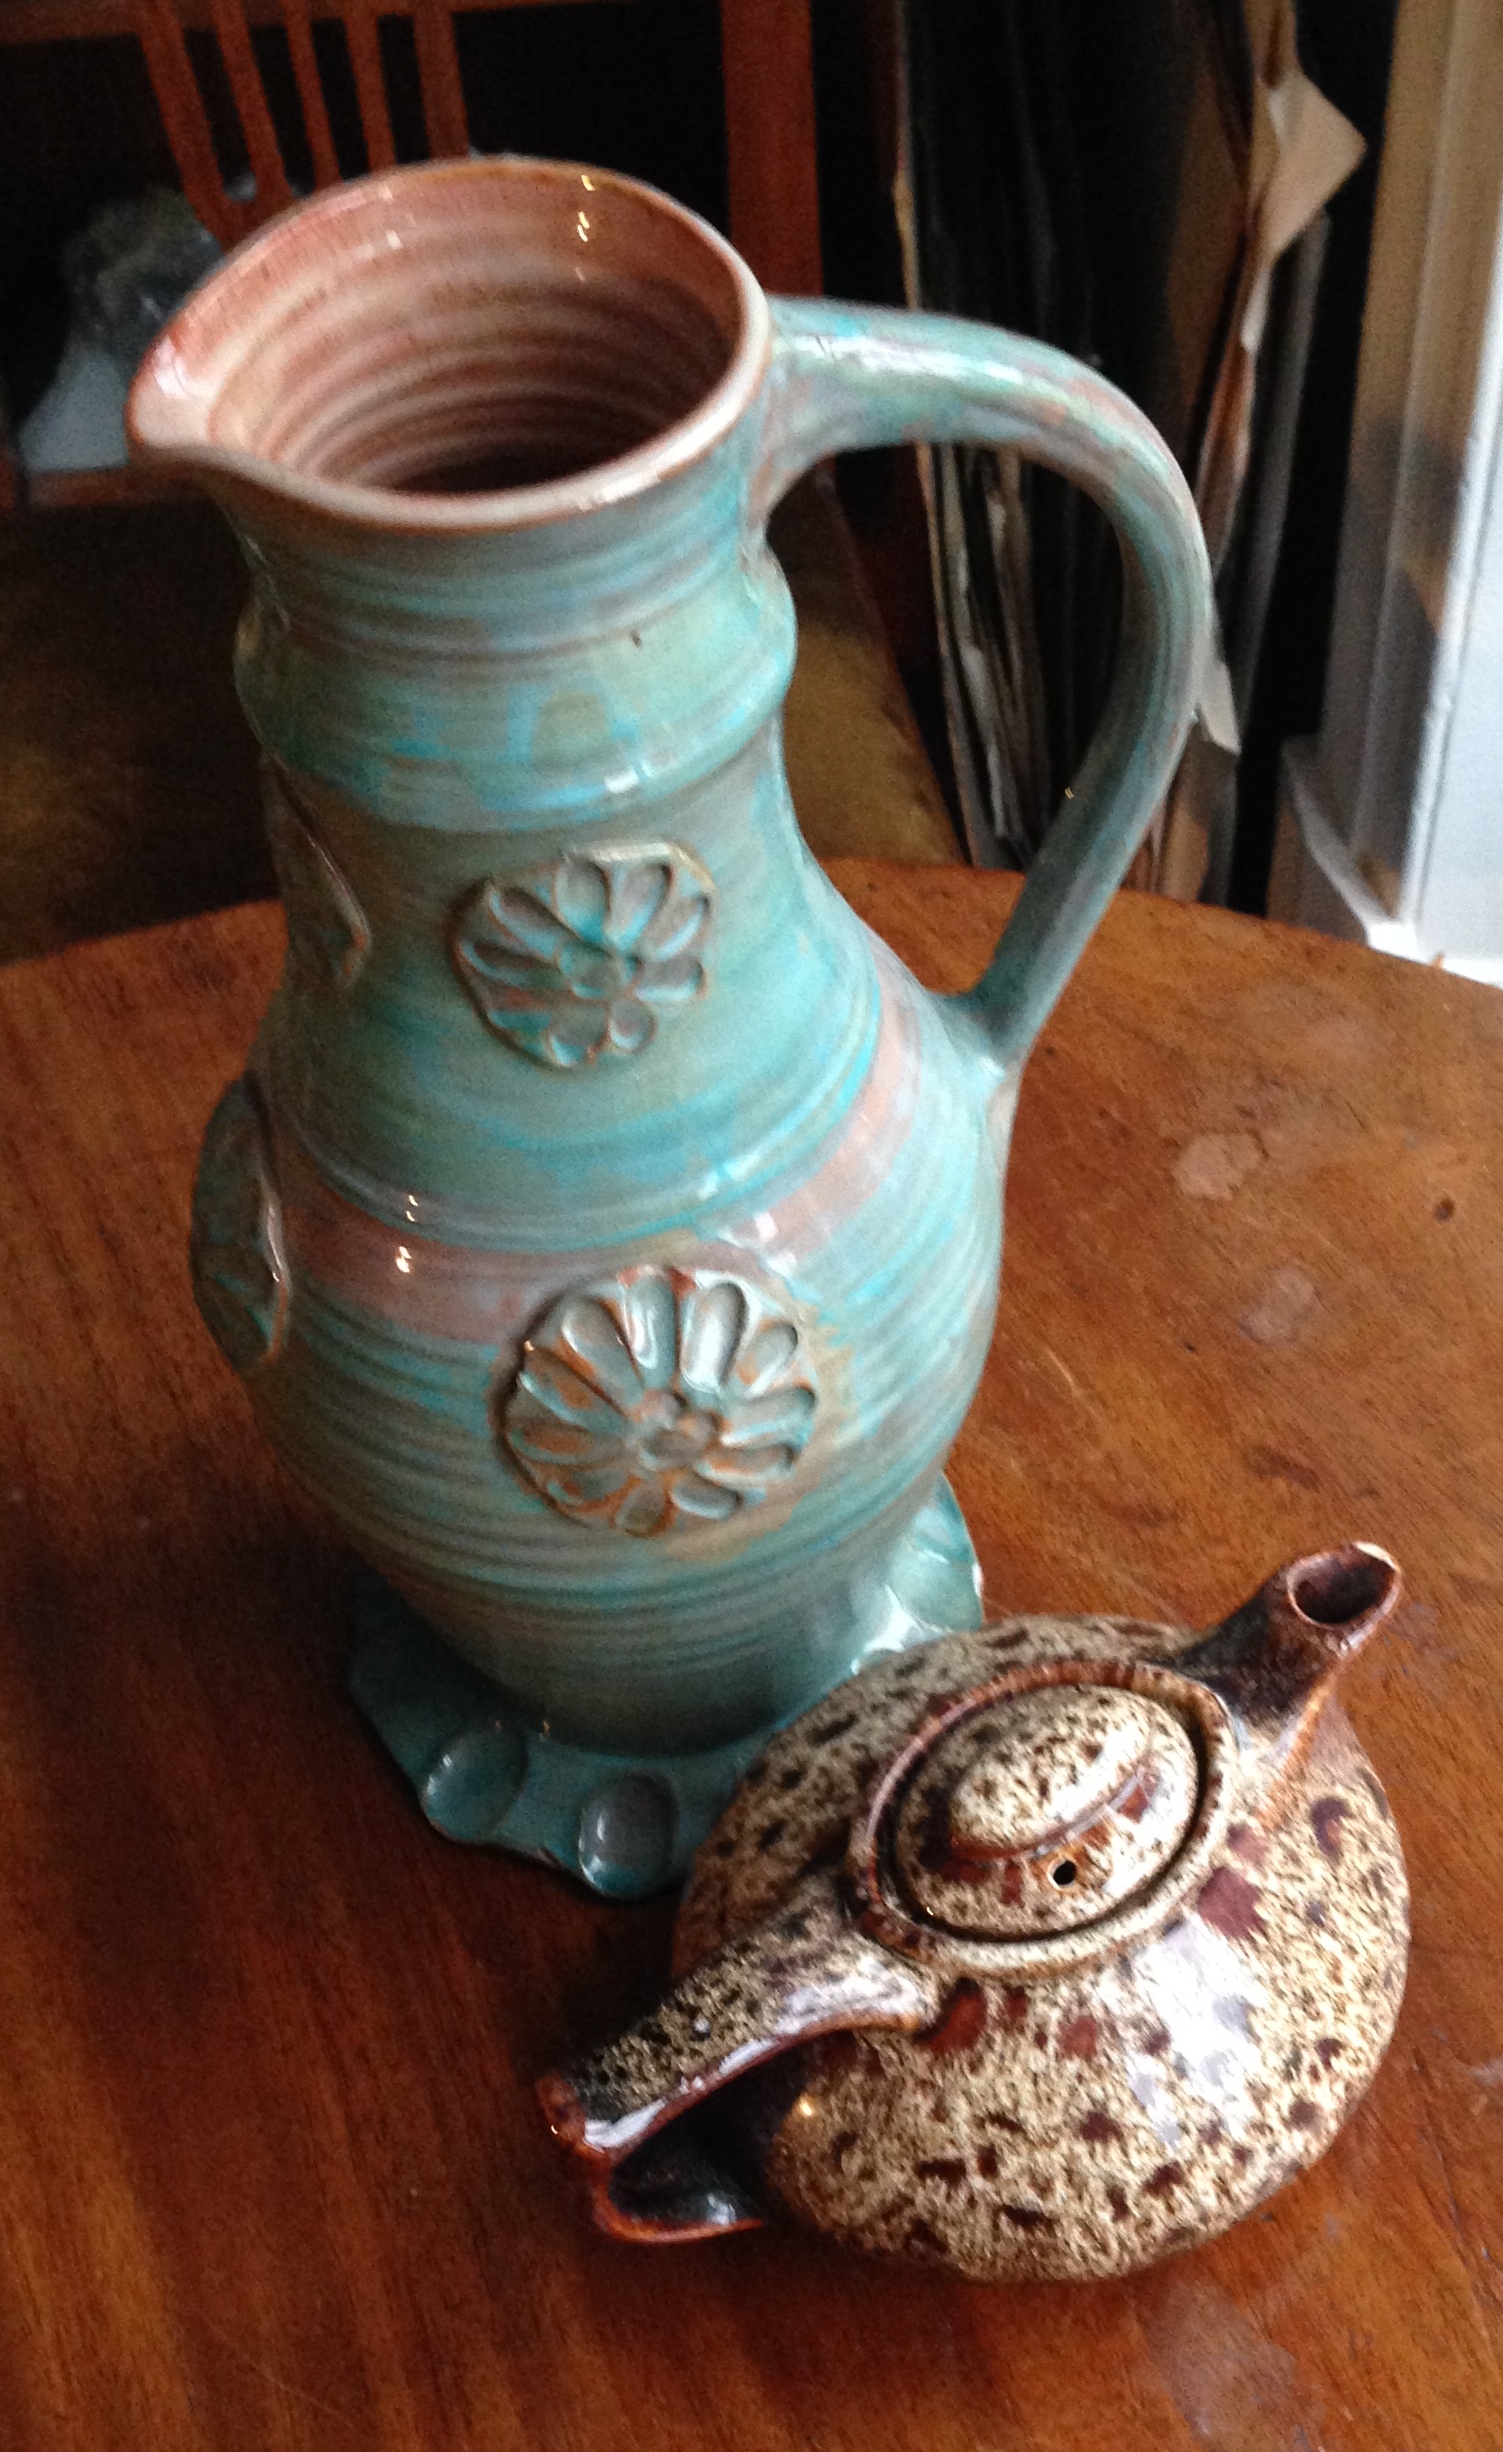 Wold pottery jug and vase.